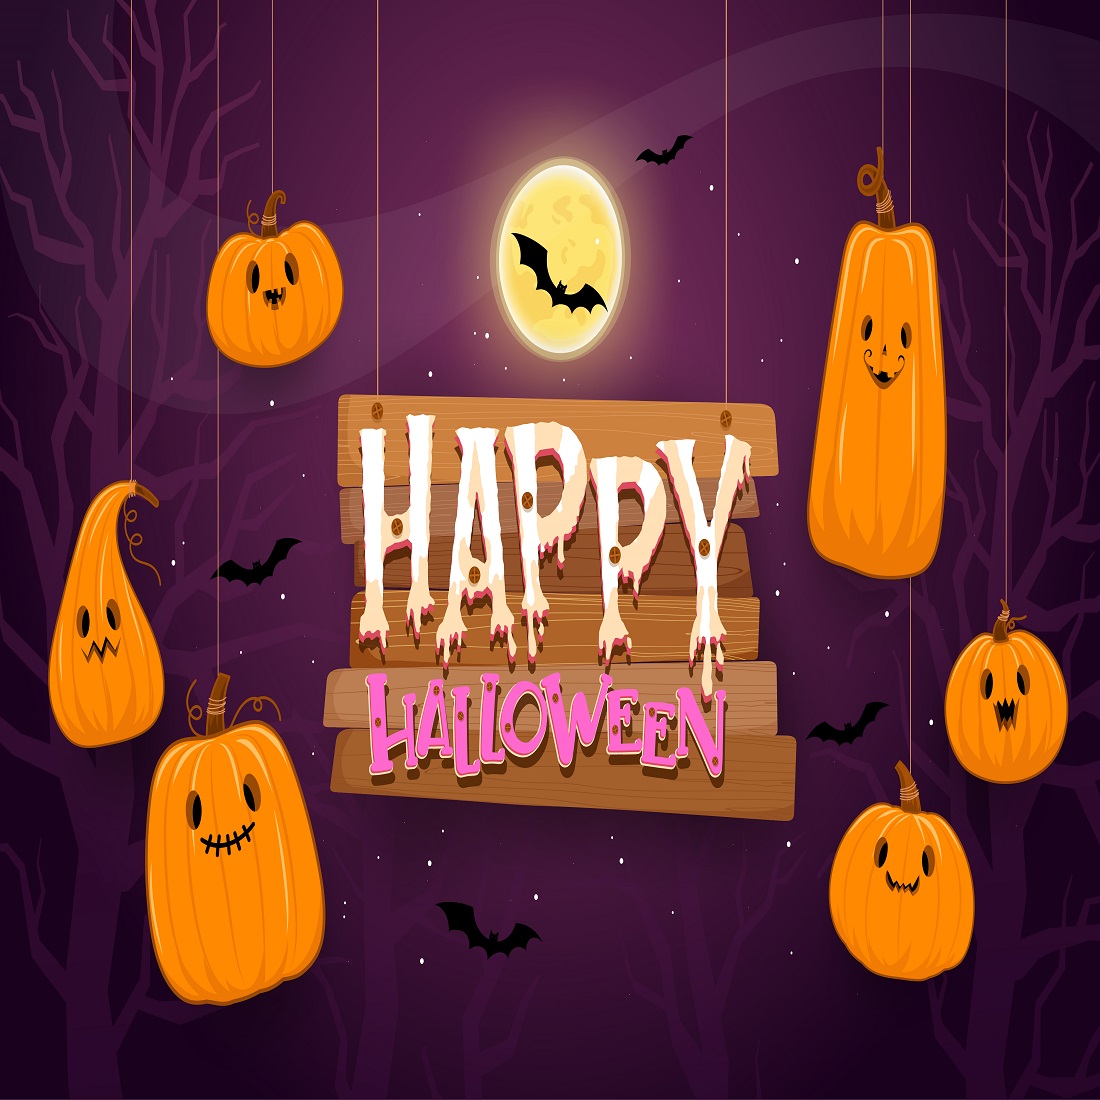 Happy Halloween background preview image.